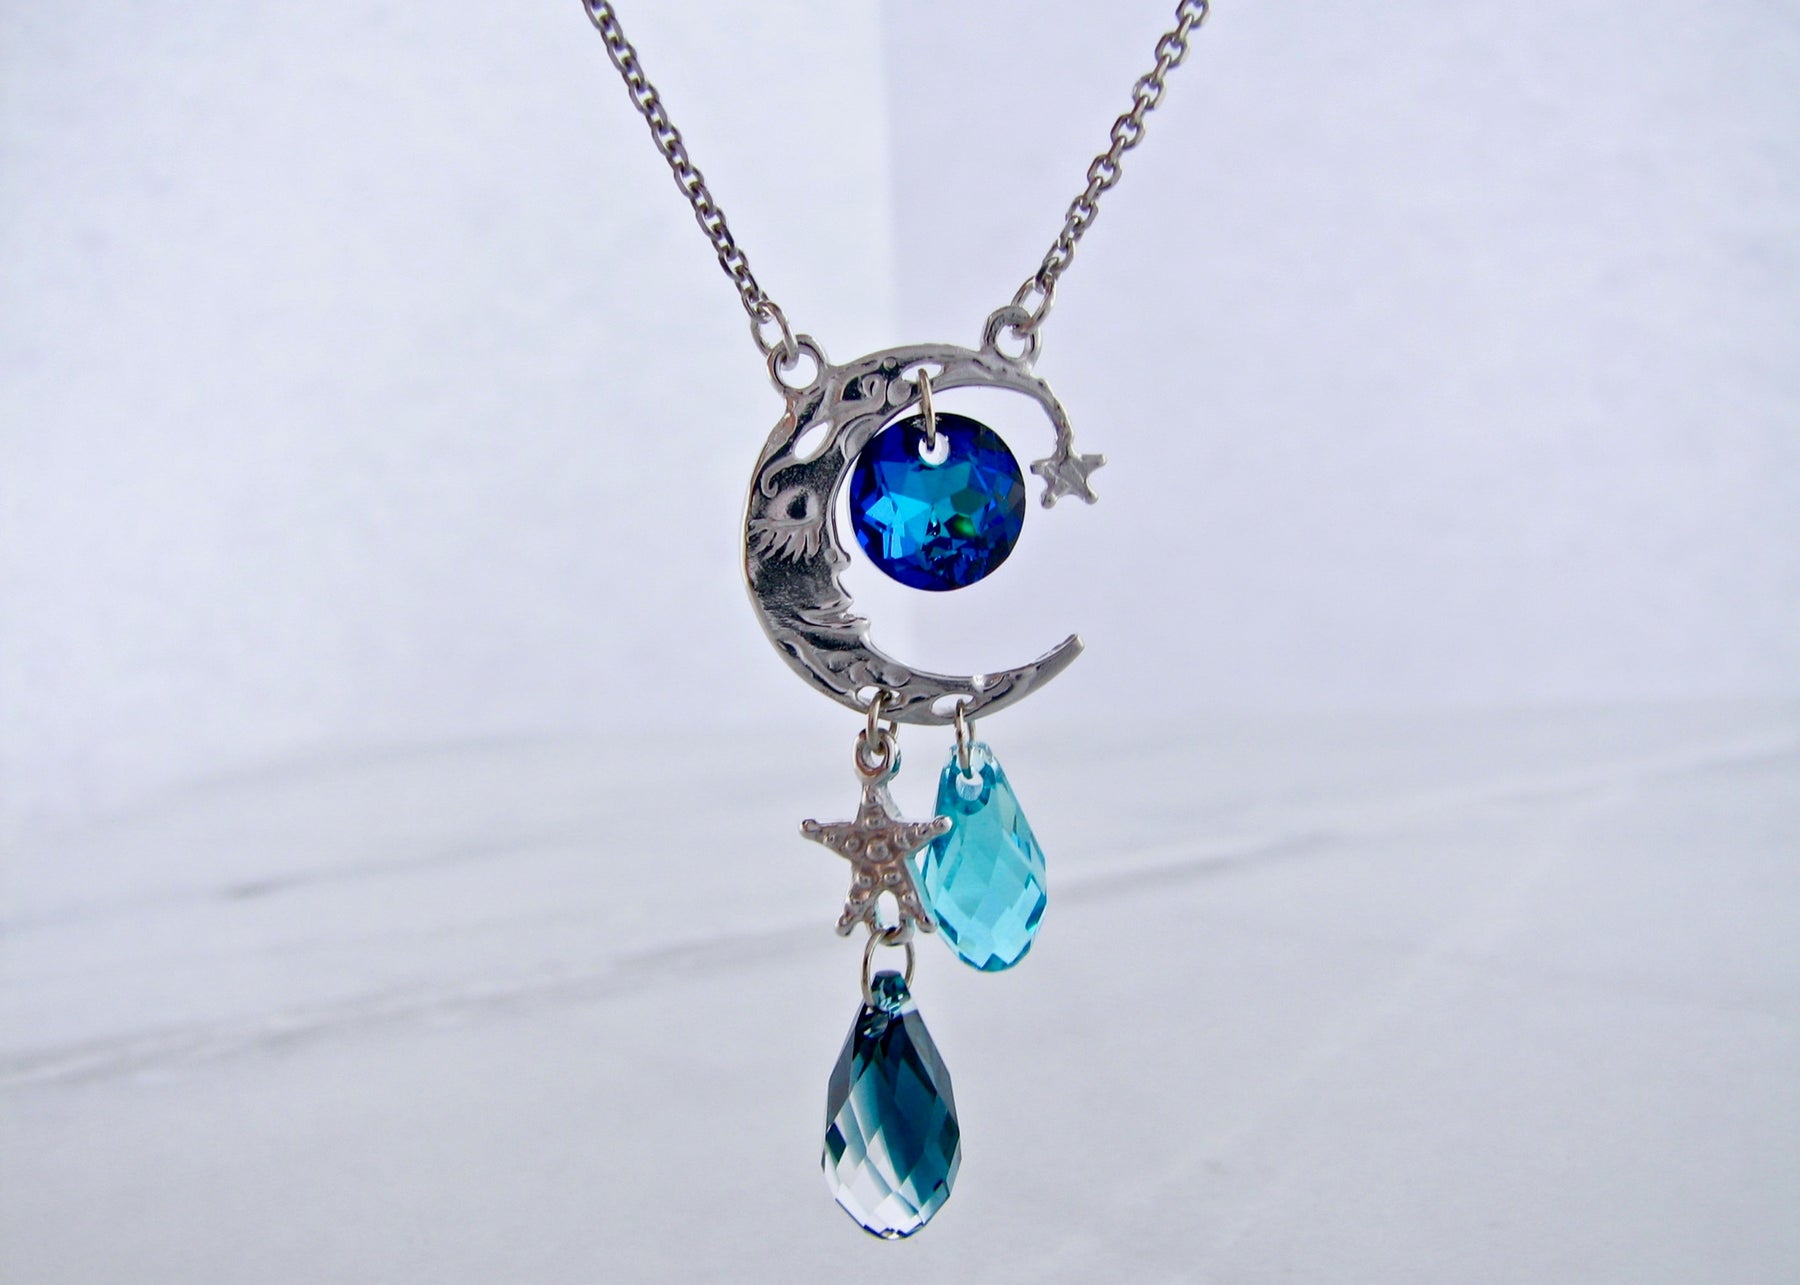 Iridescent Blue Moon Face Pendant (CECupdt) on a Silver chain Necklace -  Helia Beer Co